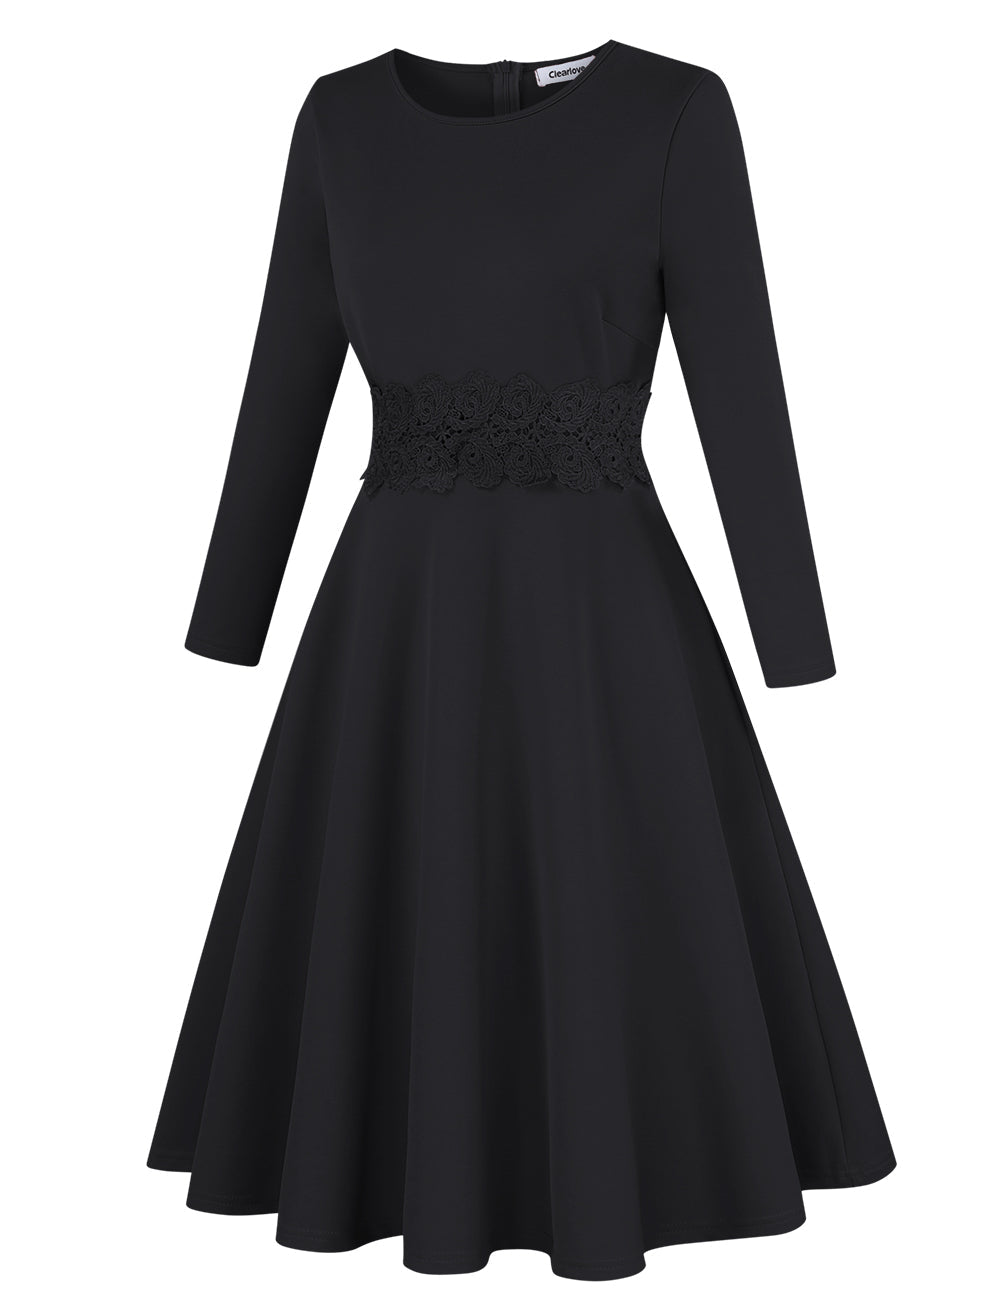 YESFASHION Ladies Cocktail Embroidered A-Line Dress Black